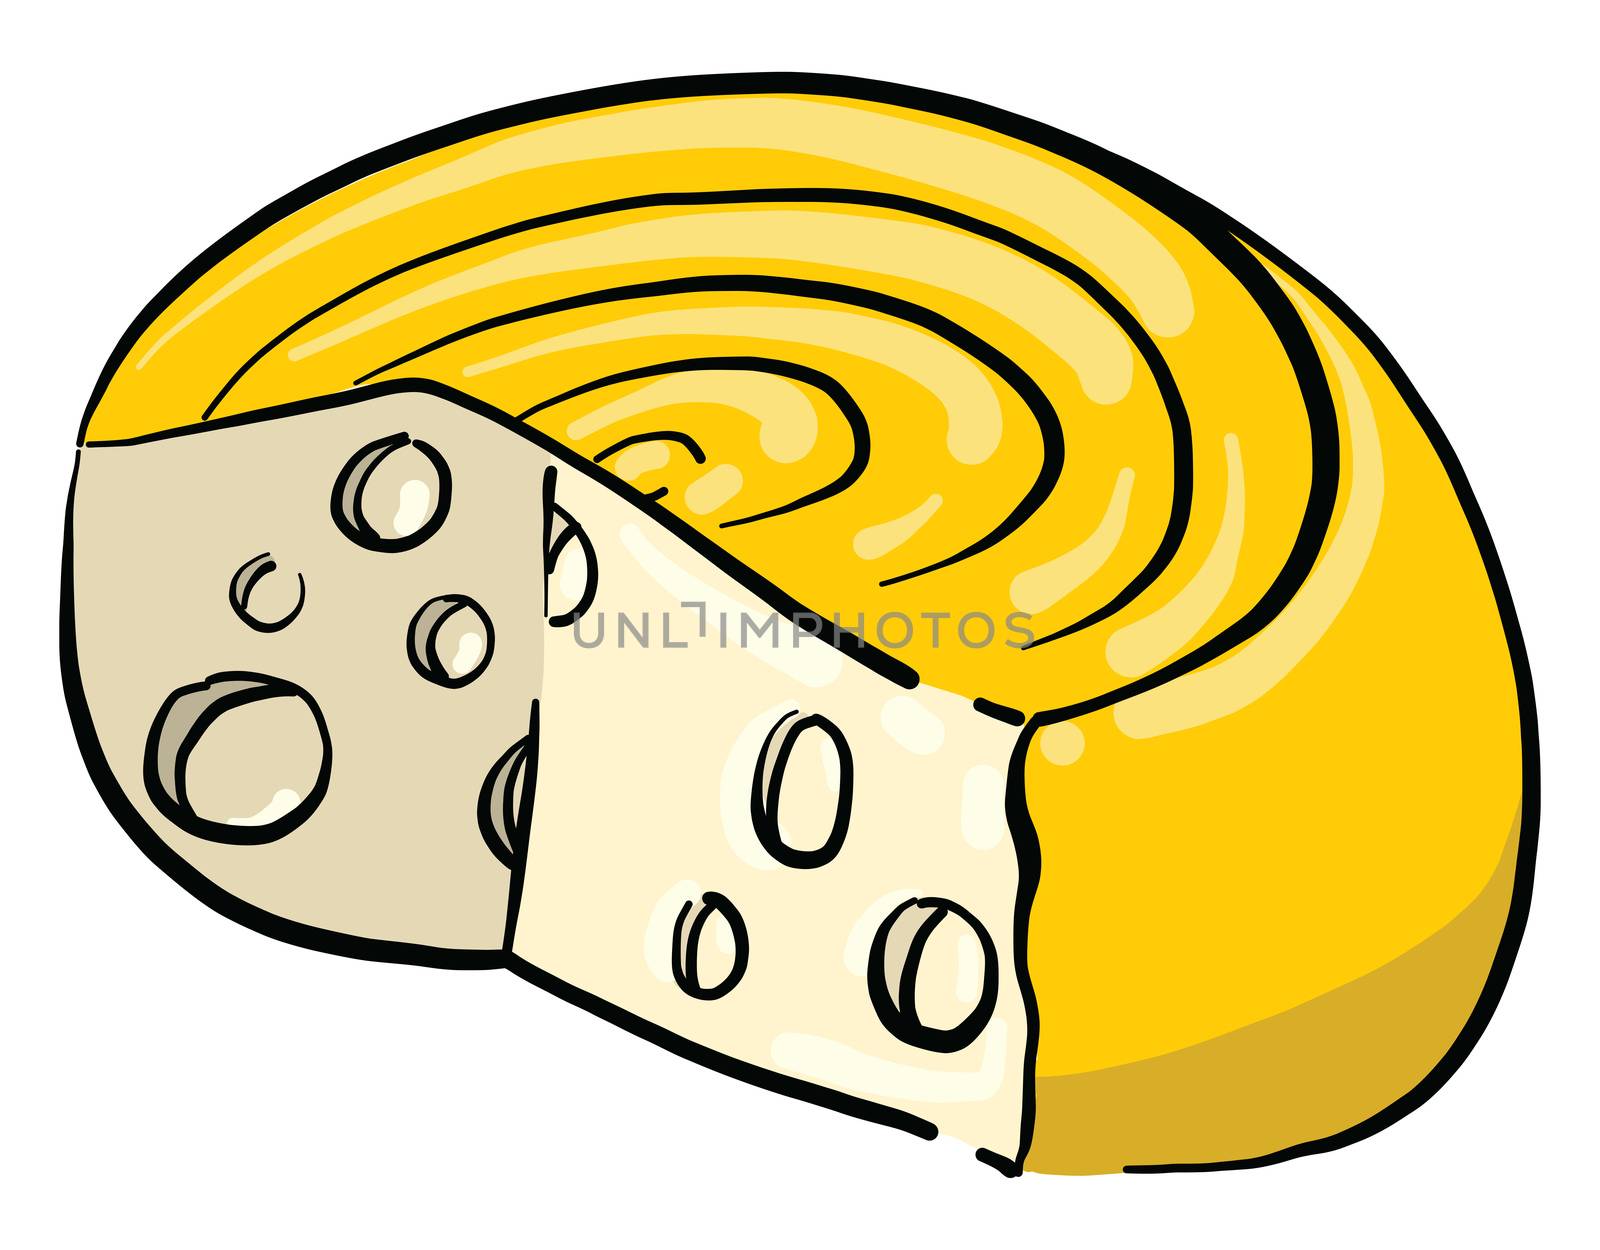 Hard cheese , illustration, vector on white background